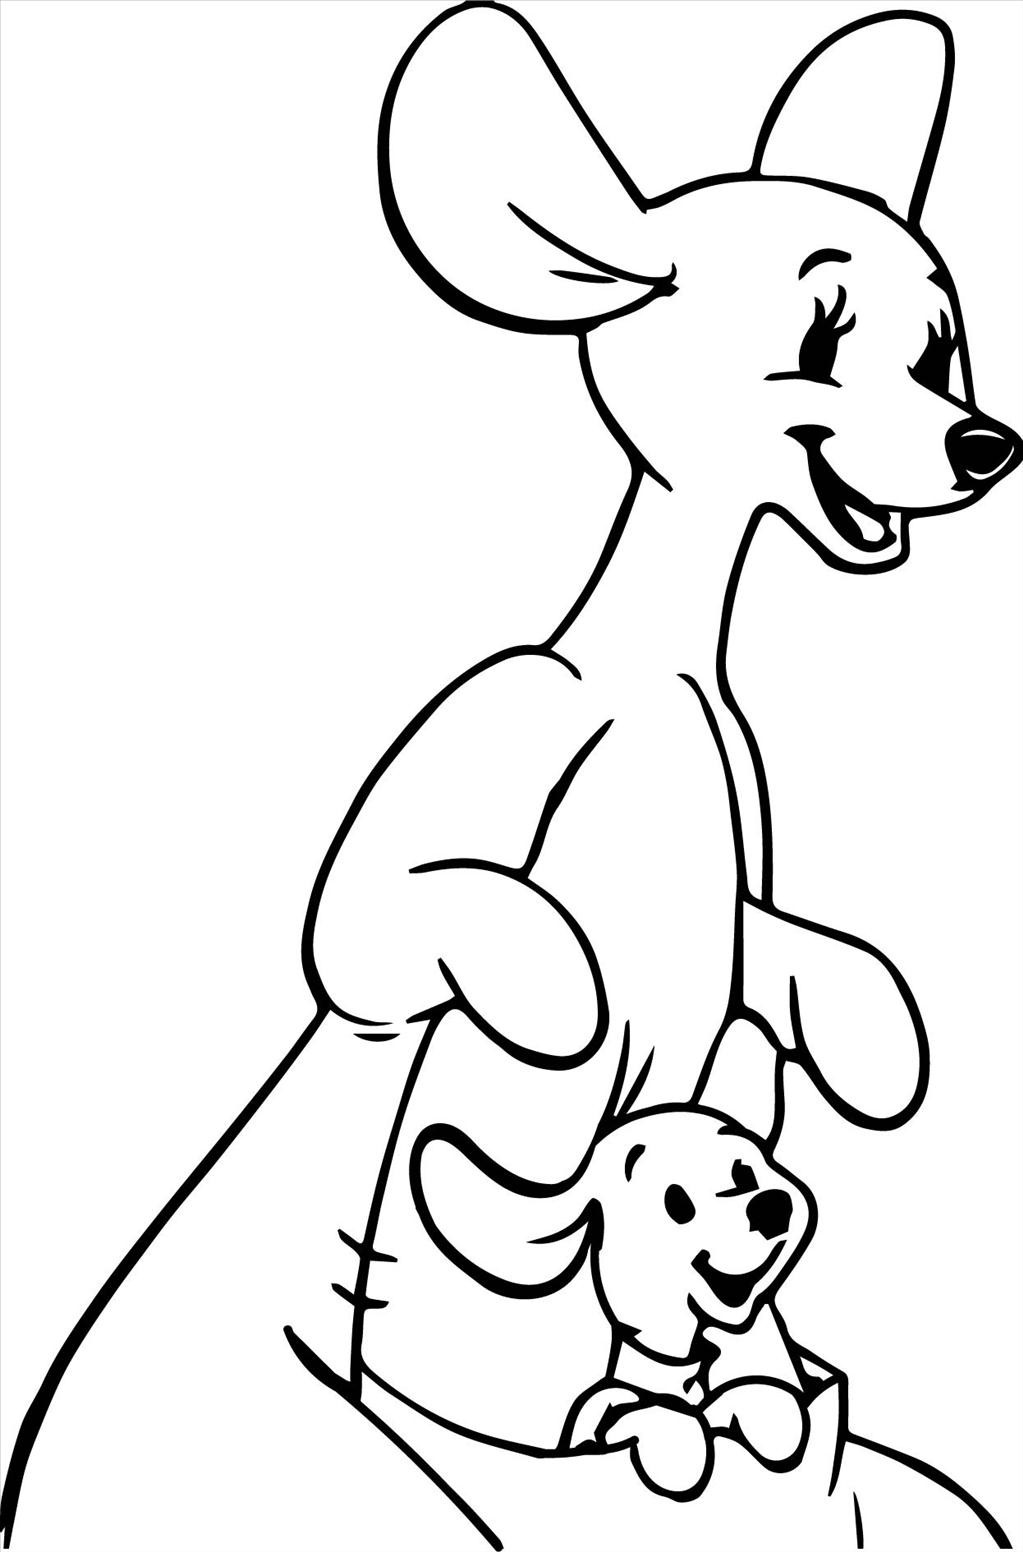 Kangaroo Coloring Pages For Kids at GetColorings.com | Free printable